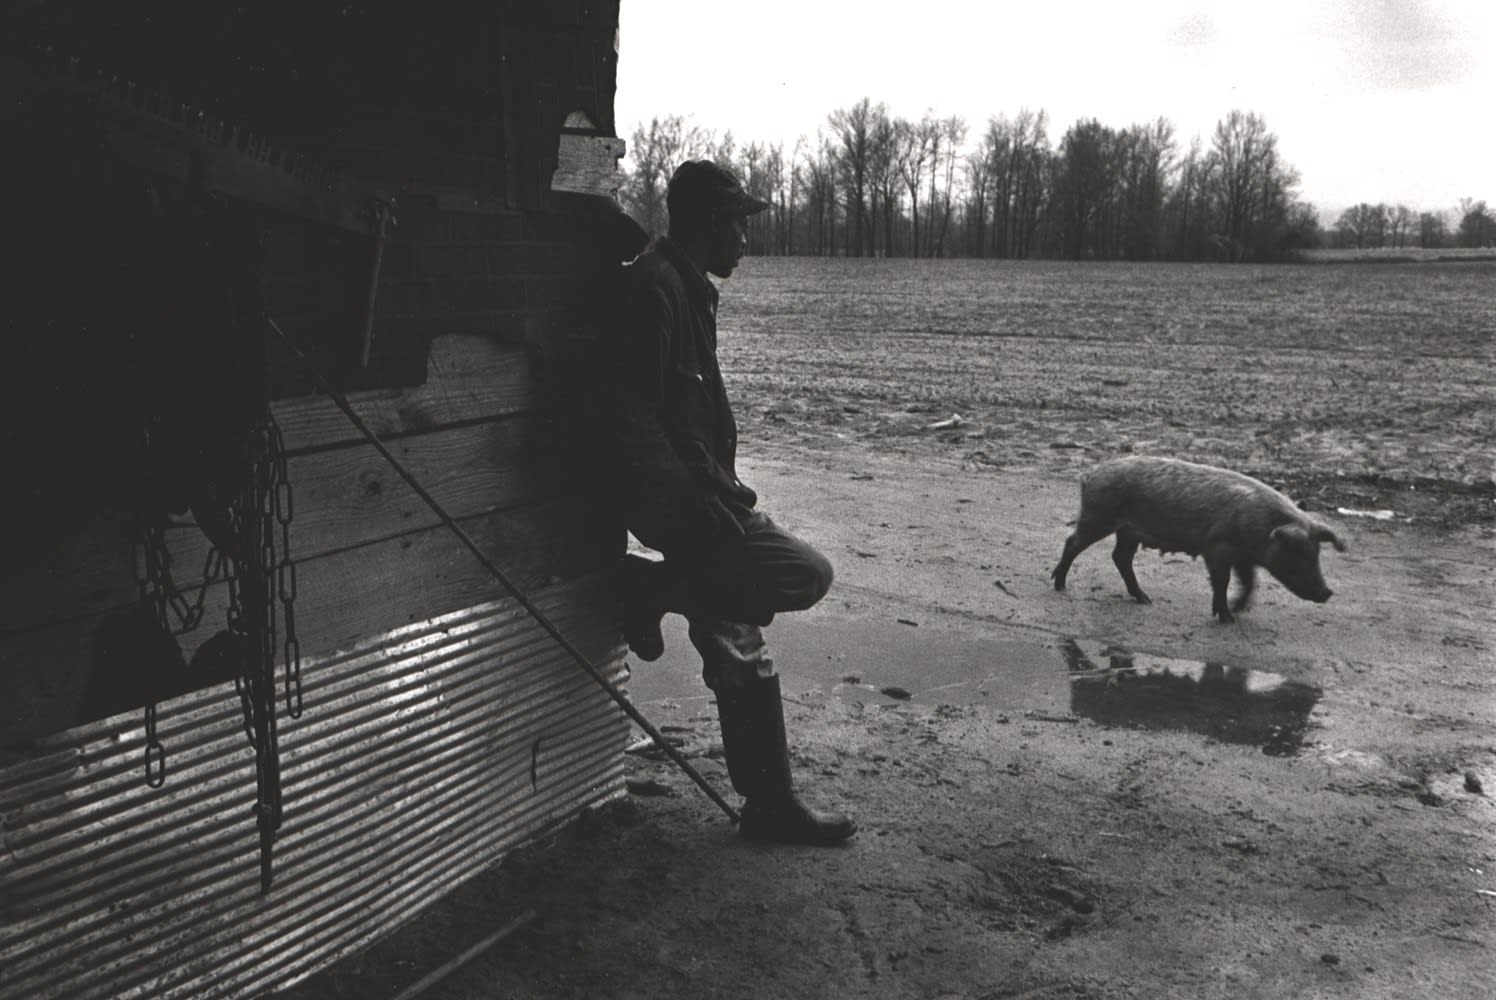 Constantine Manos, Untitled, Sharecroppers, South Carolina (lone man and hog), 1965